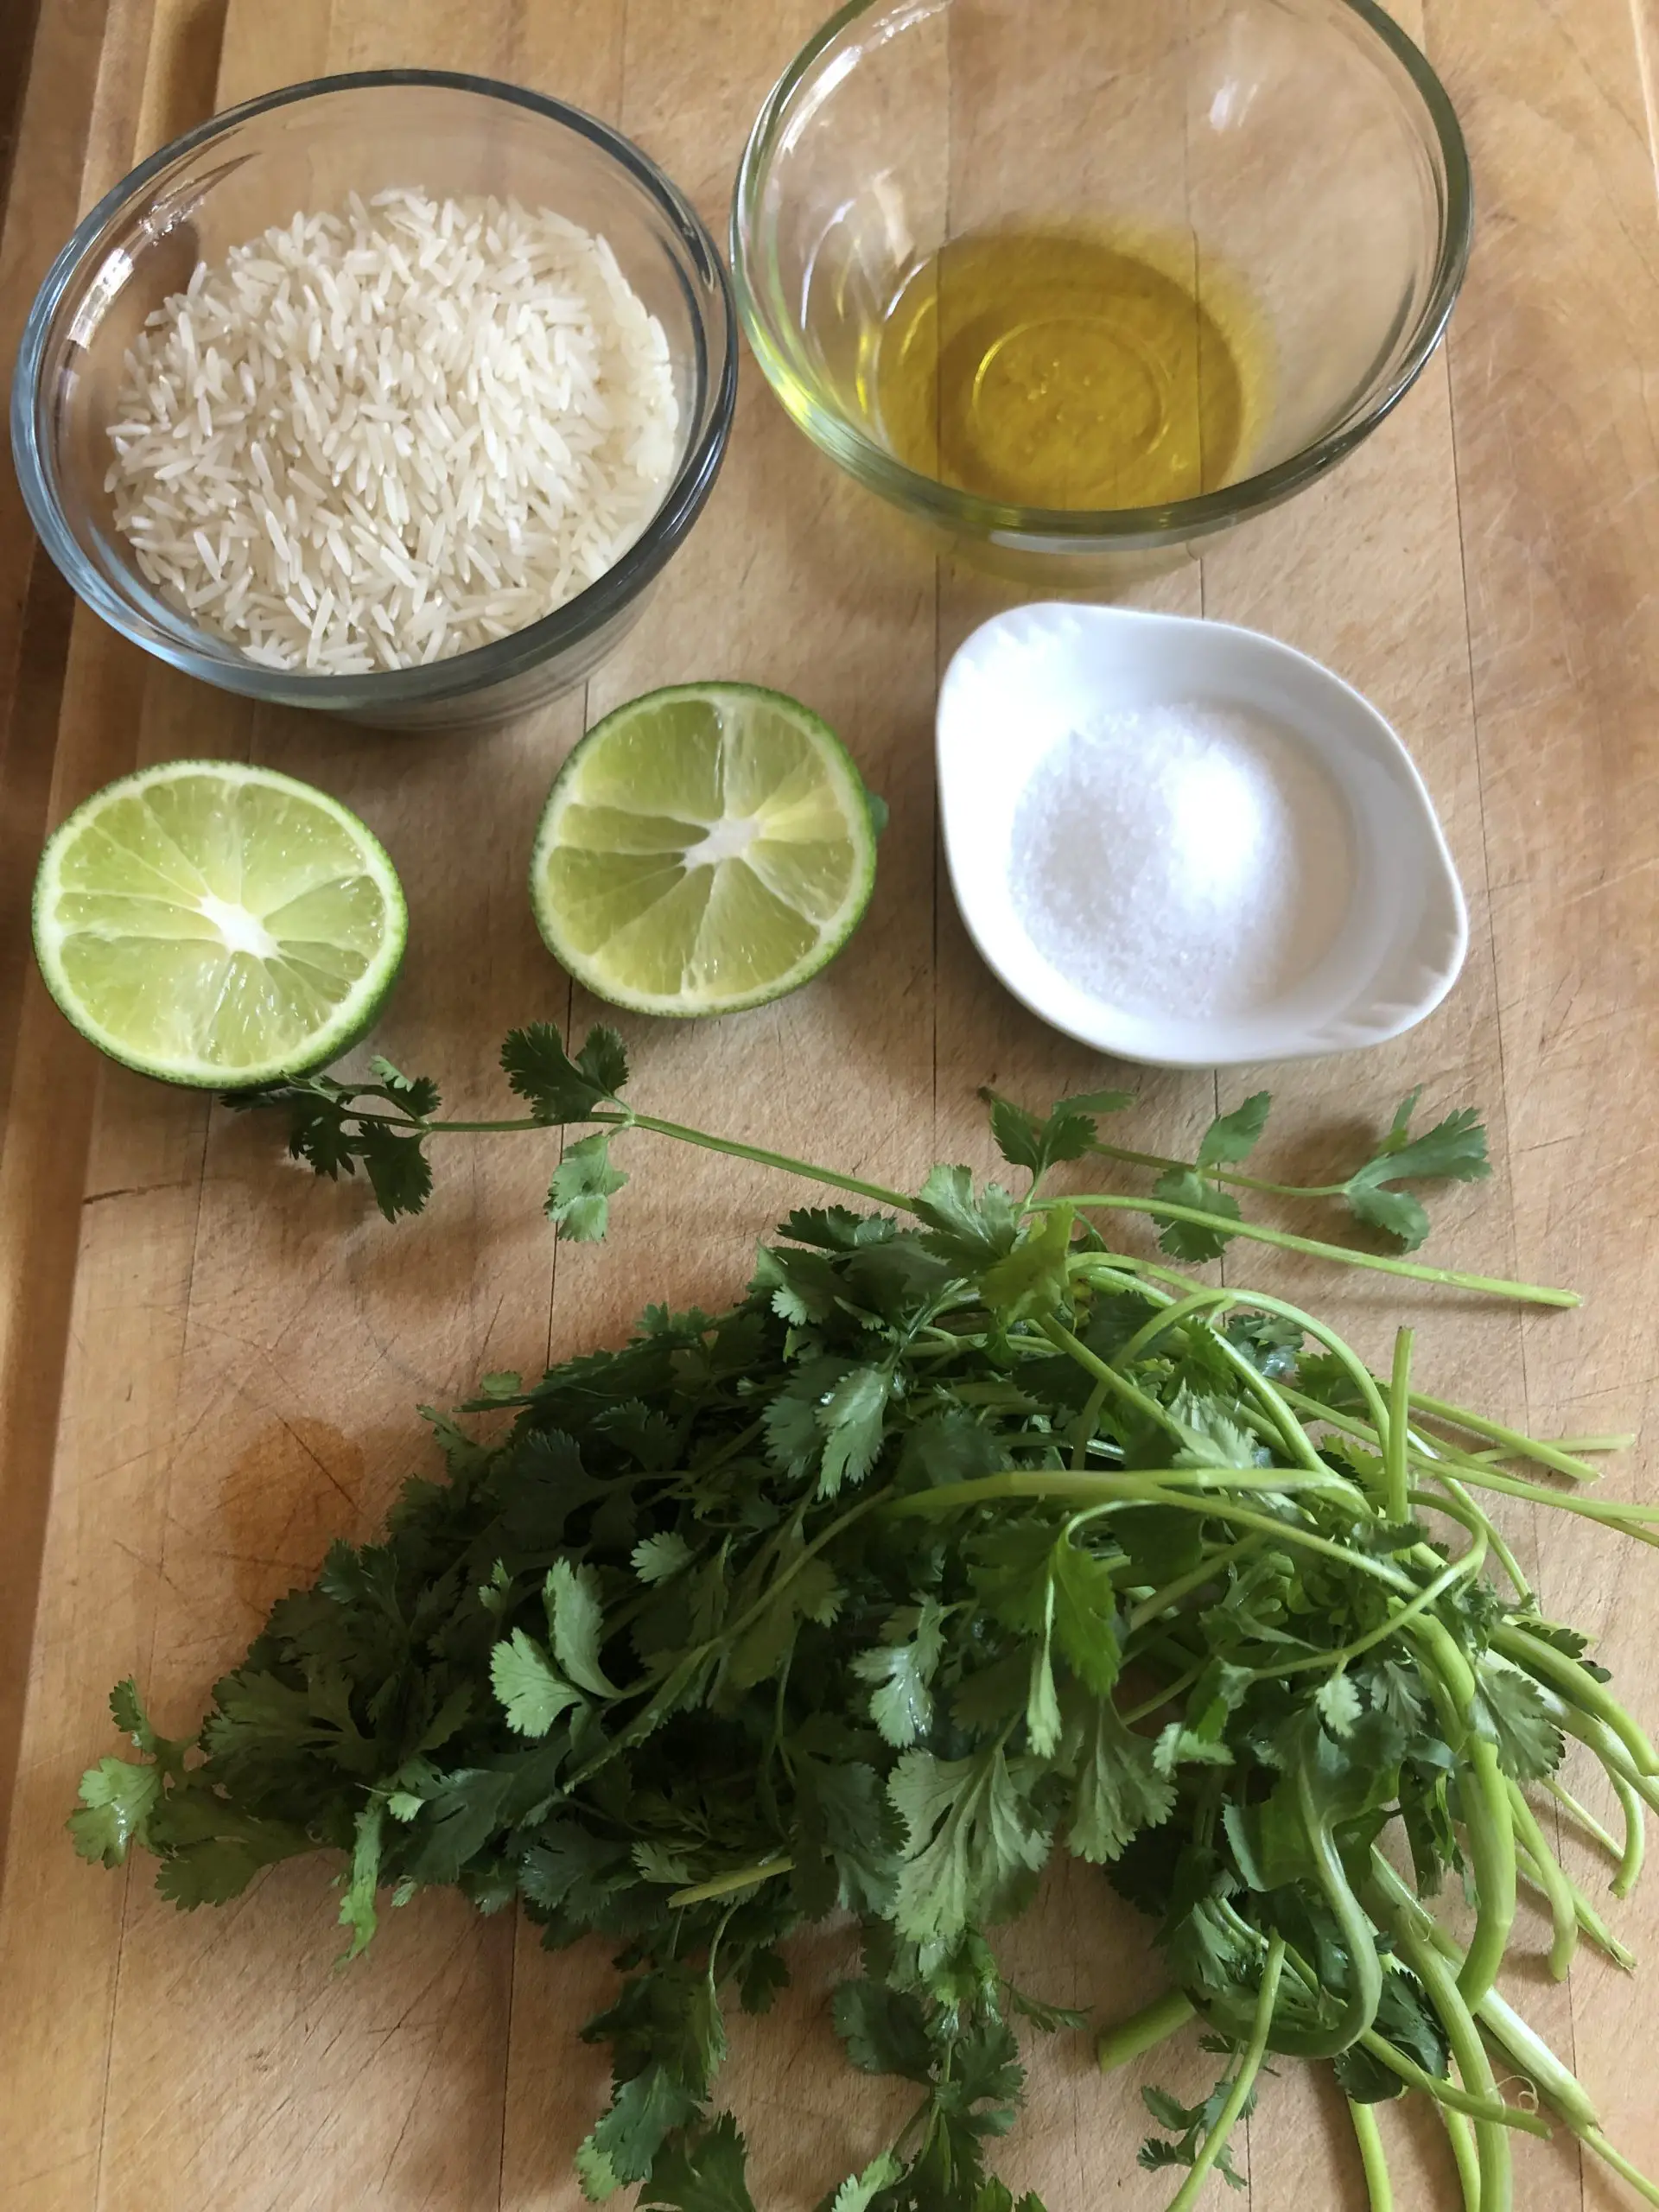 Bunch of cilantro, salt in a white dish, a cut up lime, rice in a glass bowl and olive oil in a glass bowl